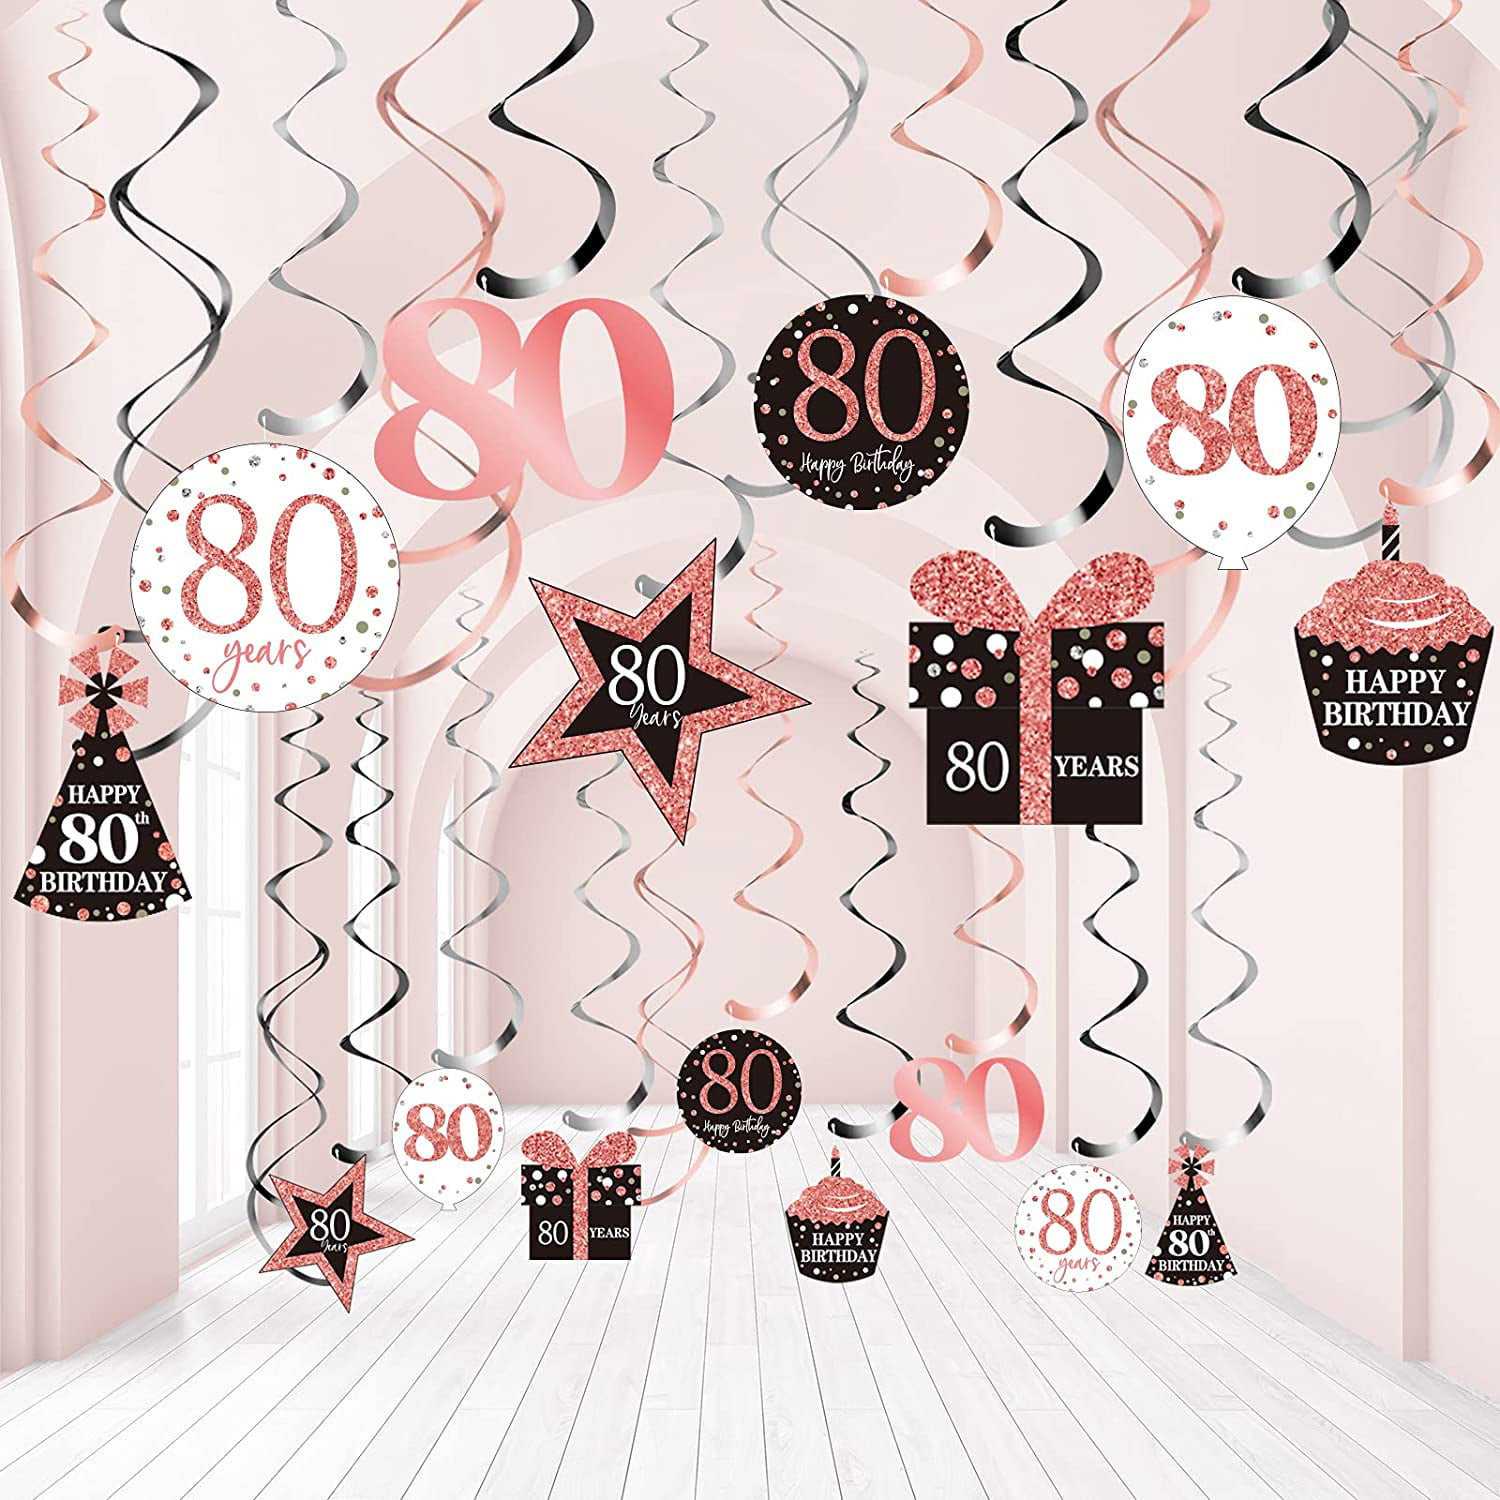 80th Birthday Party Decorations